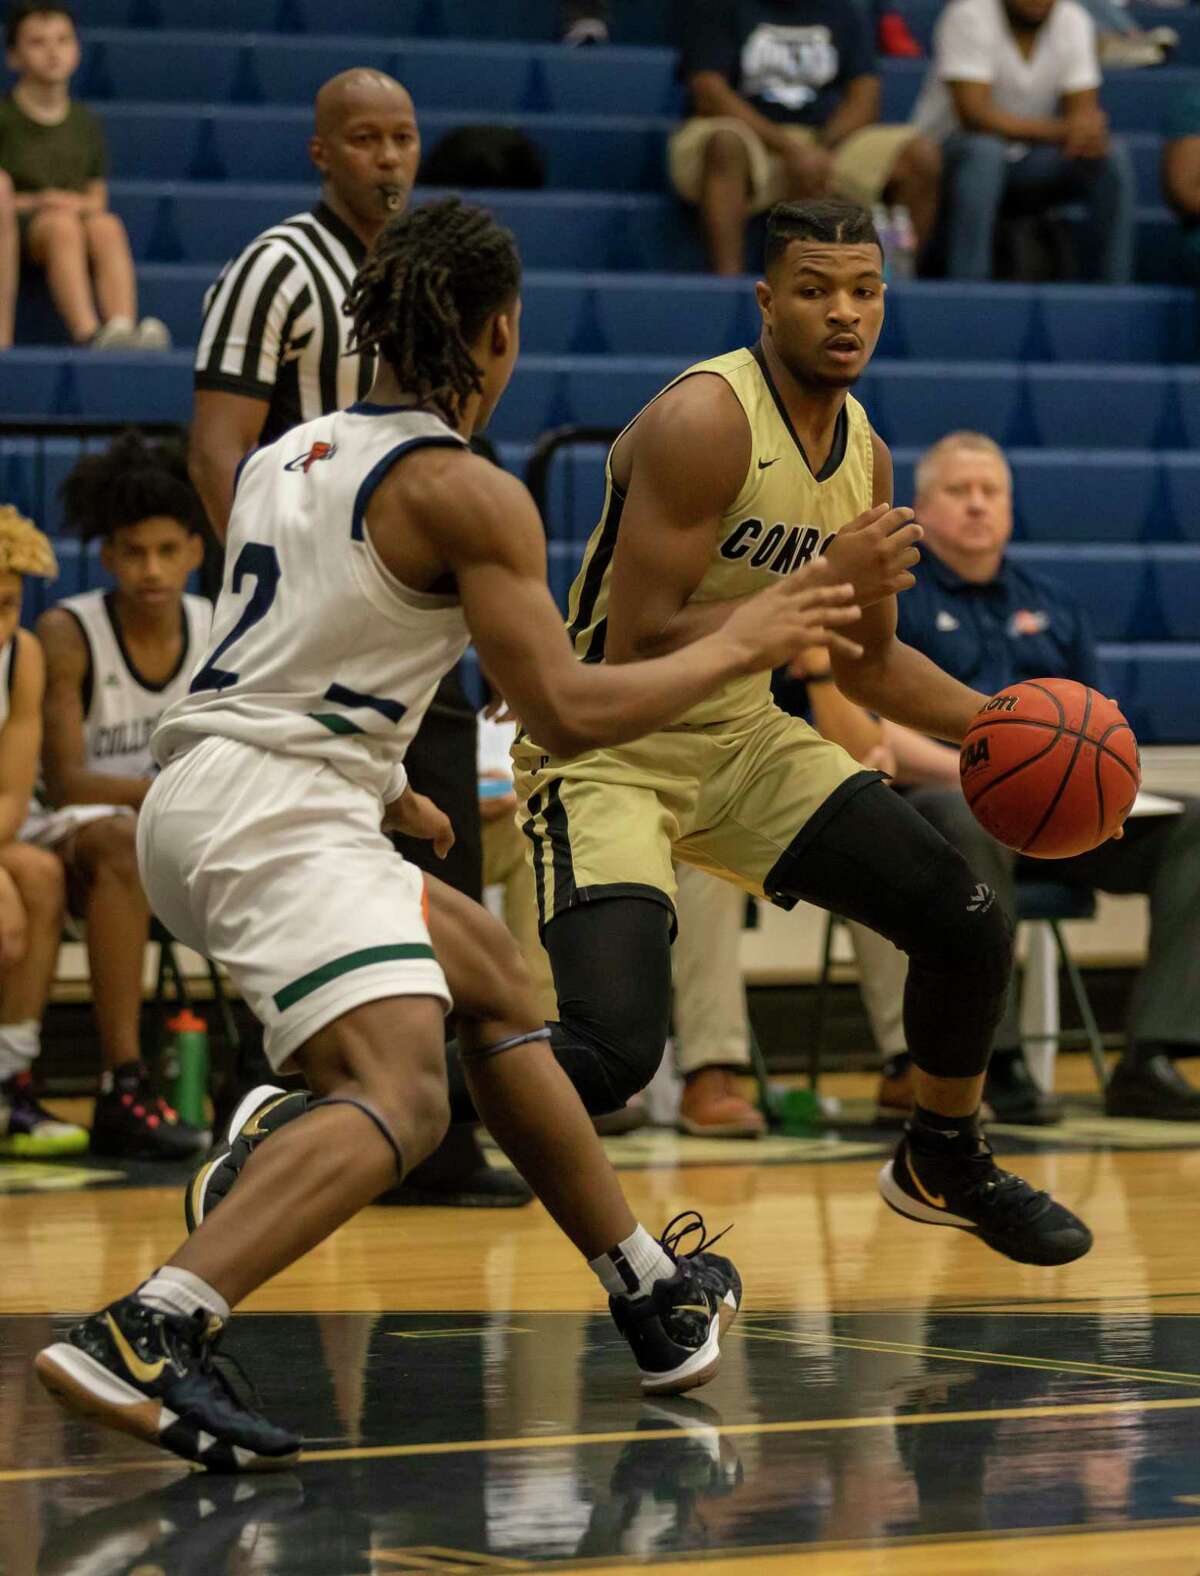 Conroe player Michael Phoenix (2) looks for an opening to pass the ball under pressure from College Park guard Marvin Dock (2) in a District 15-6A boys basketball game at College Park High School in The Woodlands.